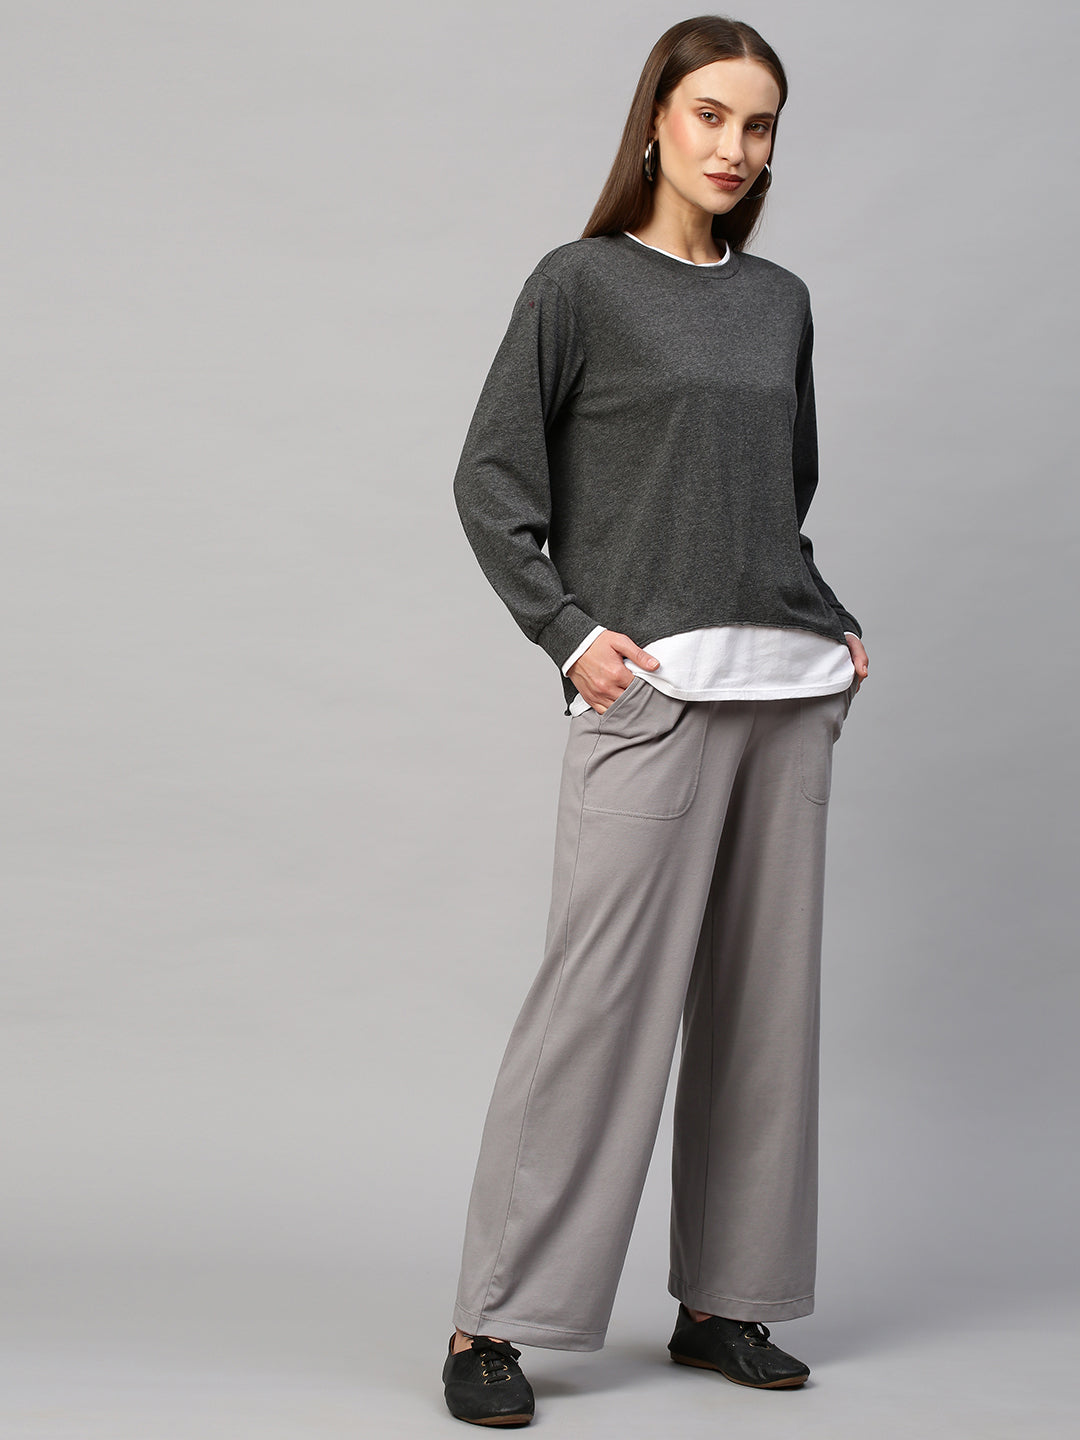 Tonal "Airport Look" With Faux Layered Sweat Tee & Lounge Pants